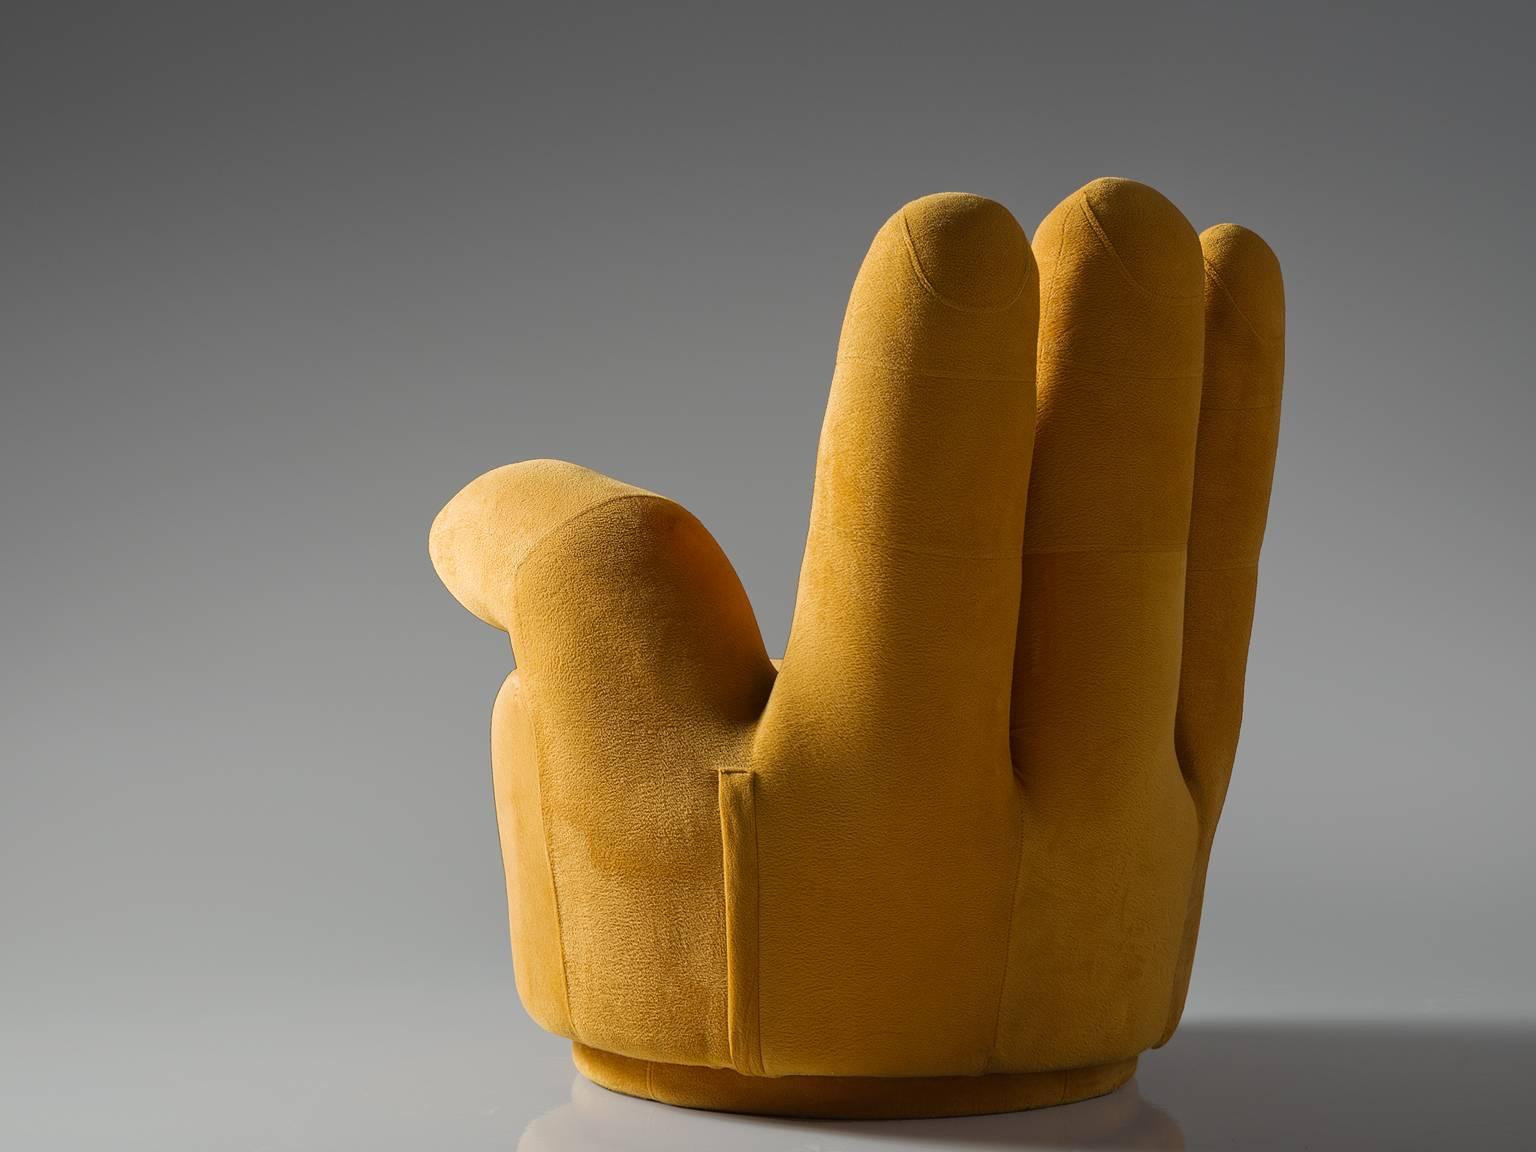 hand shaped chair